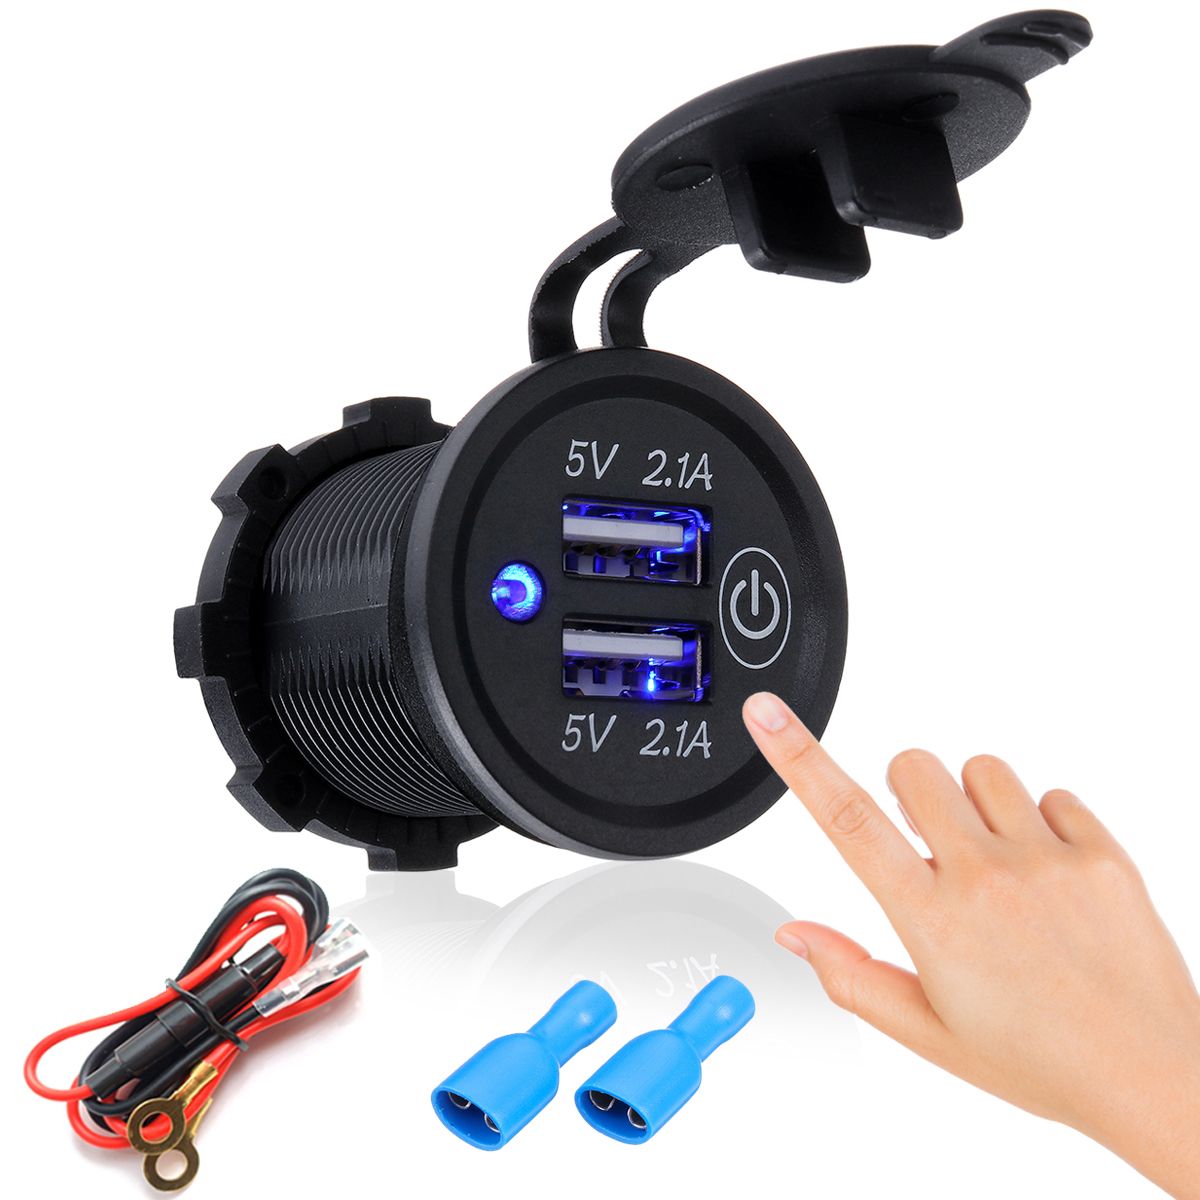 P2-S-Touch-Switch-21A21A-Dual-USB-Car-Motorized-Modified-Charger-Mobile-Phone-12-24V-1534303